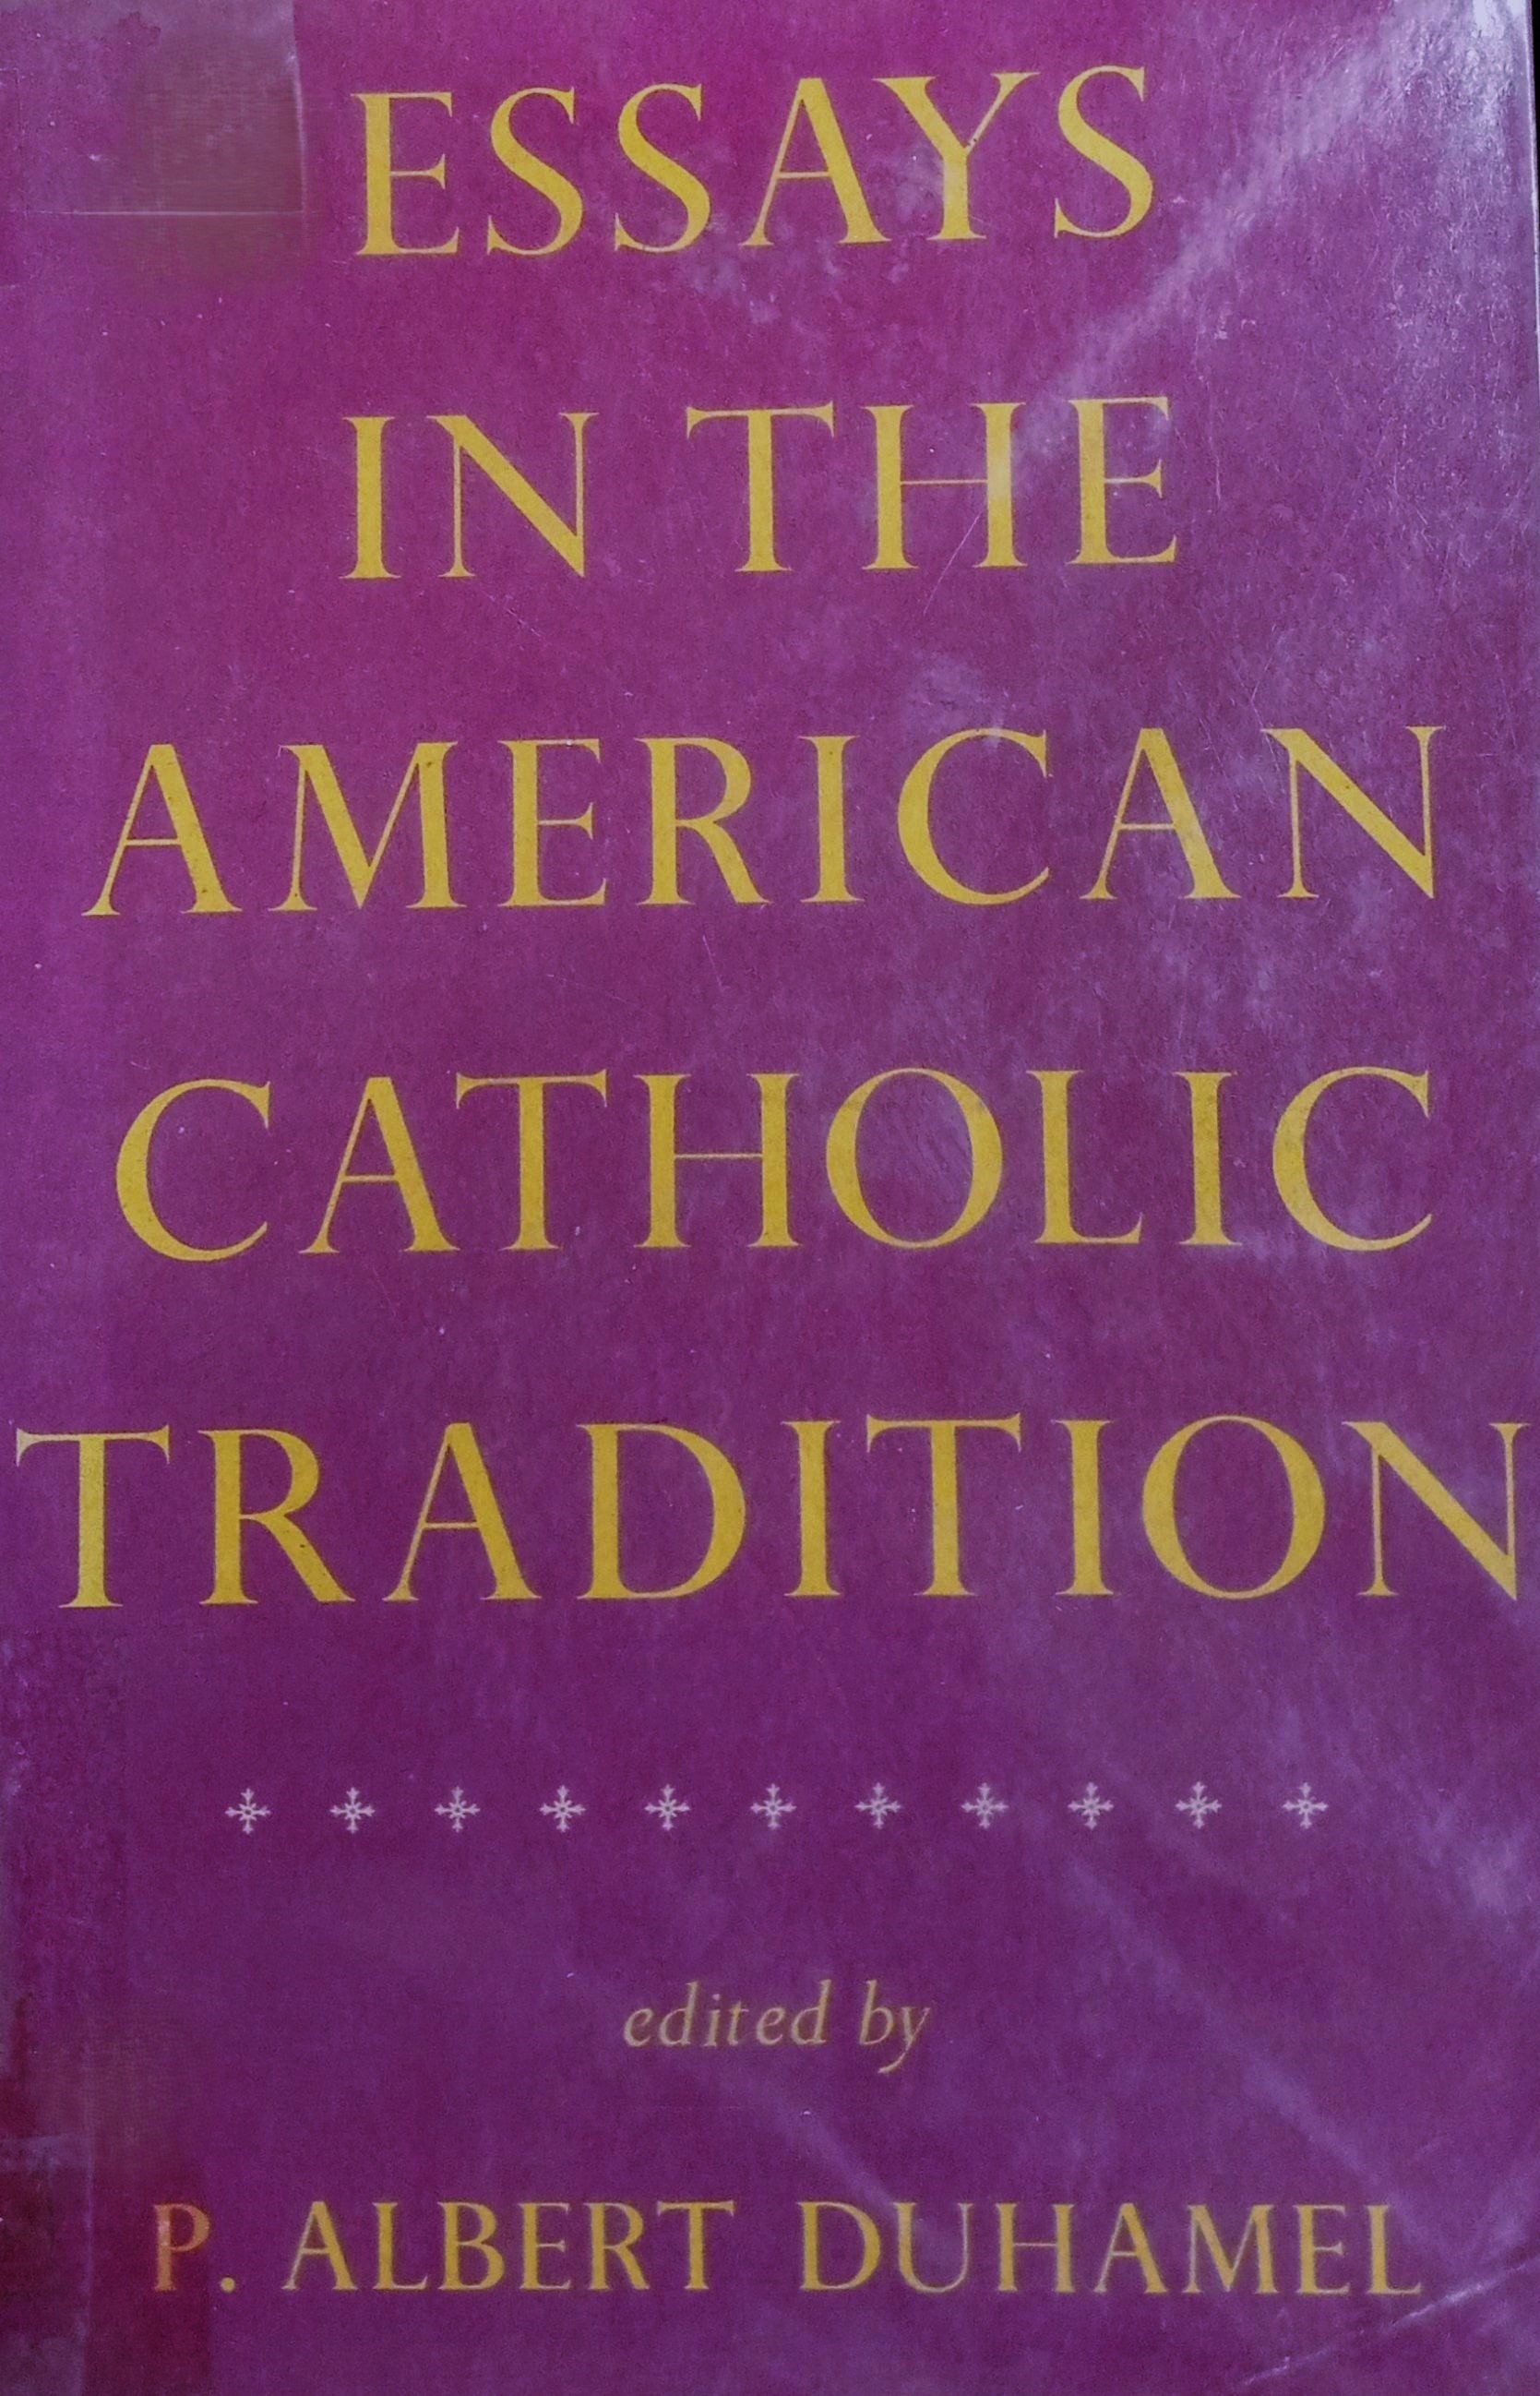 Essays in the American Catholic tradition.